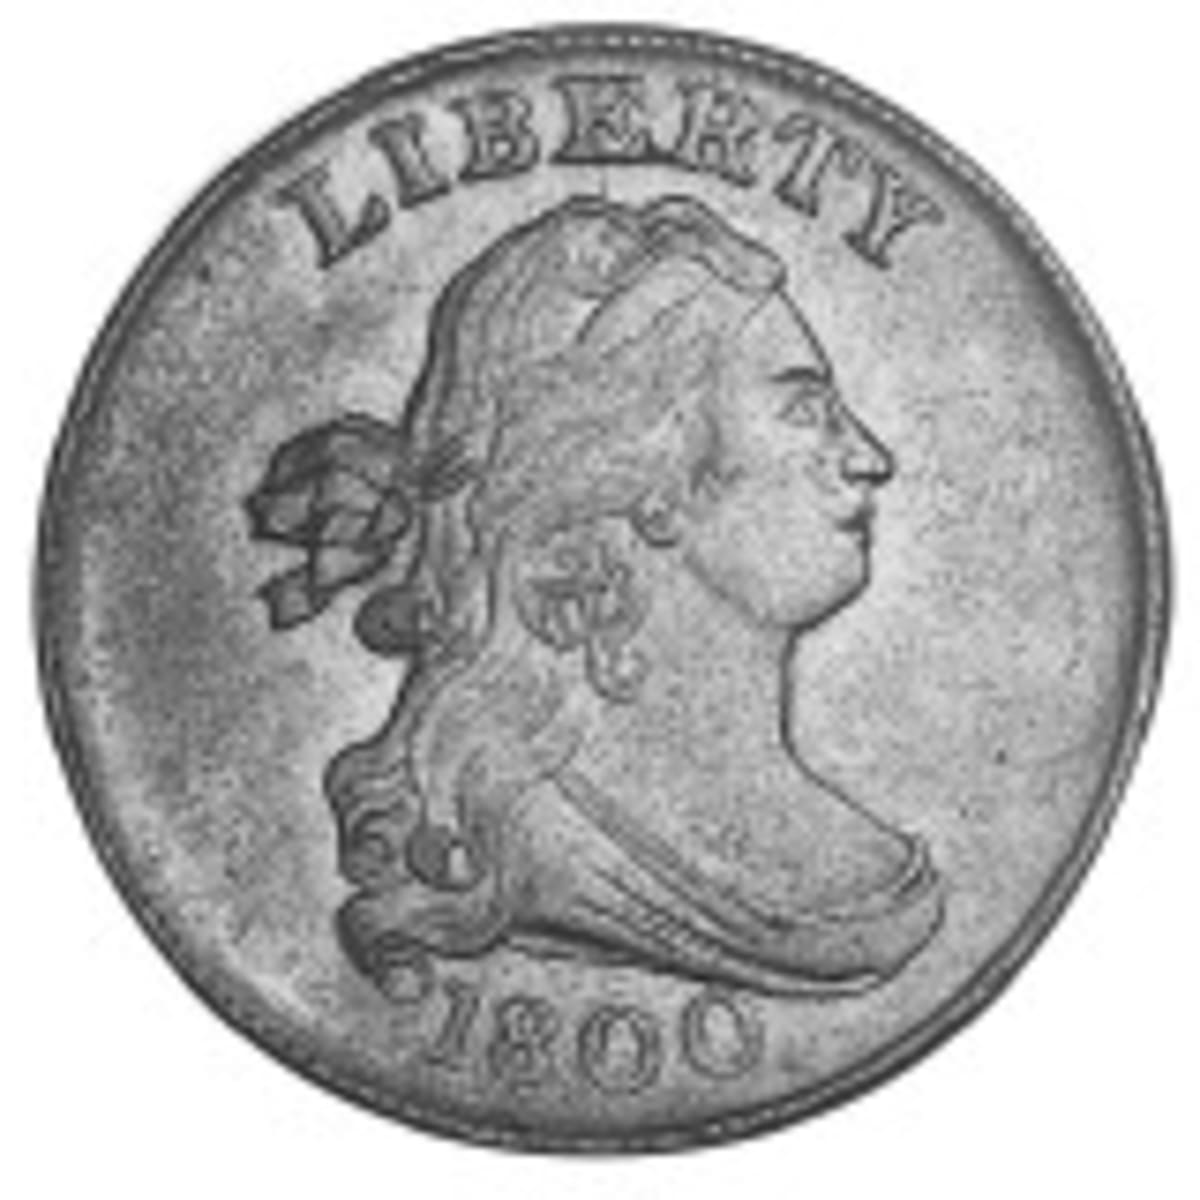 Coin Value: US Half Cent 1840 to 1857